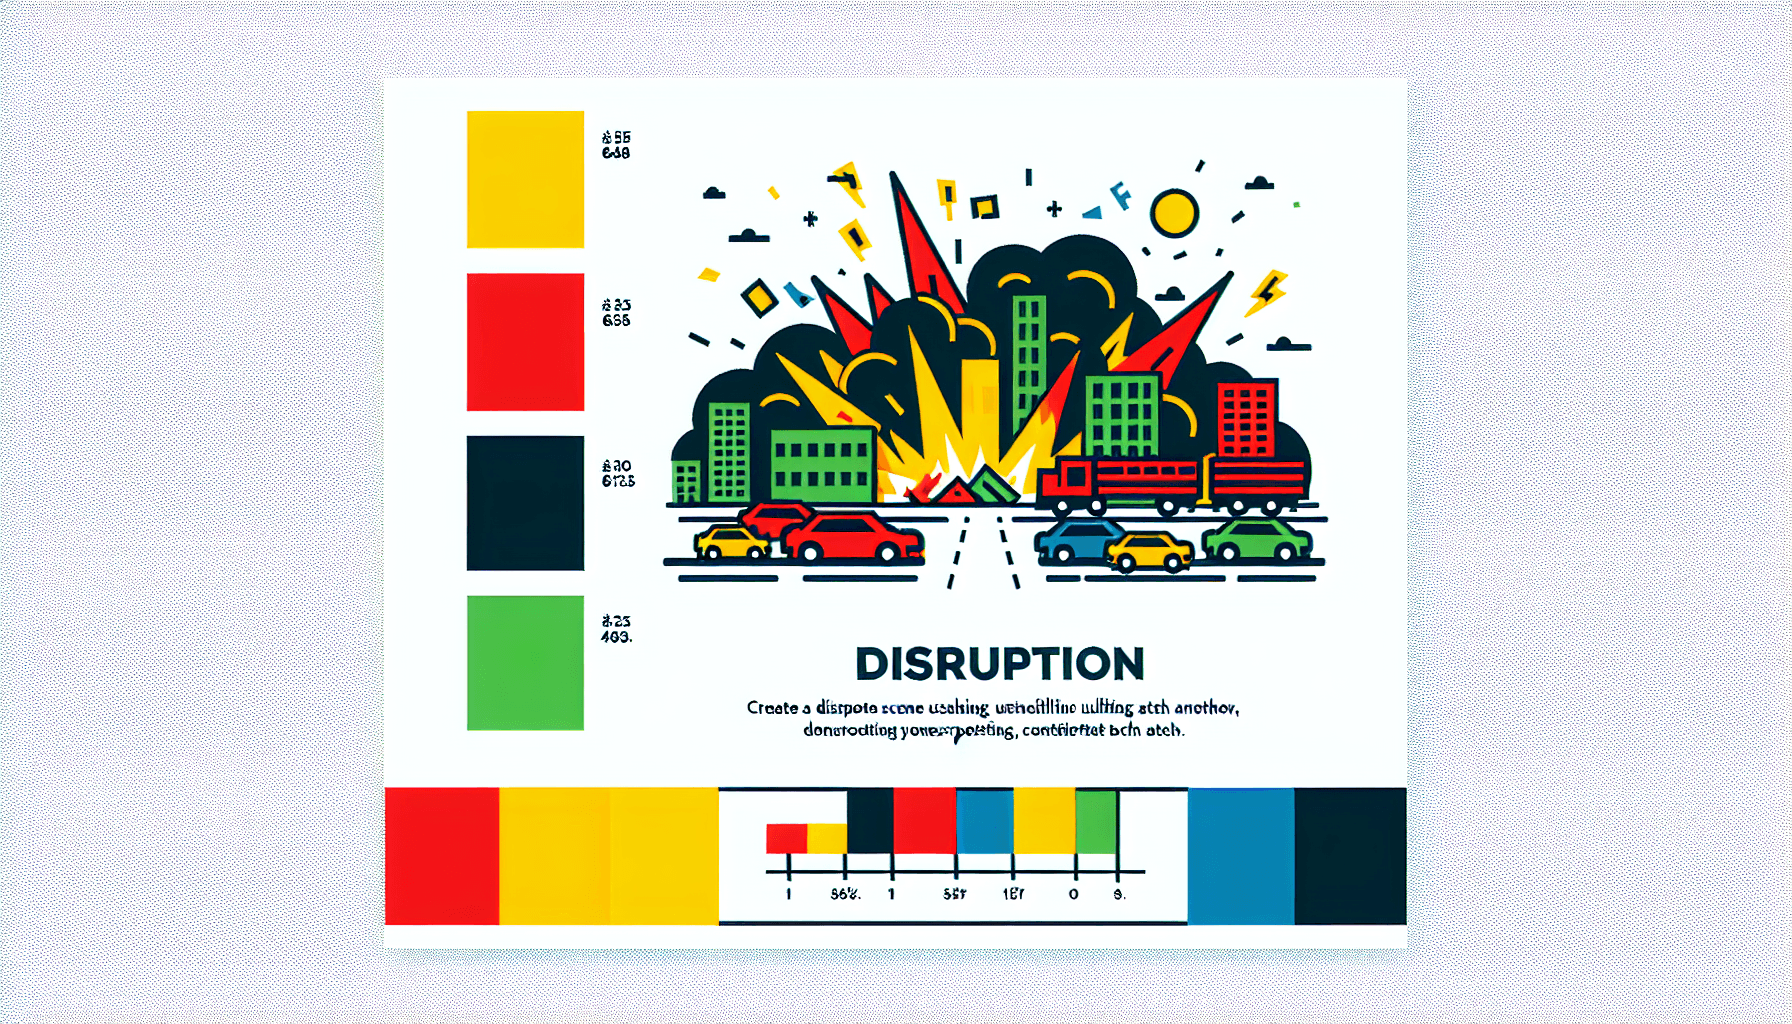 Disruption in flat illustration style and white background, red #f47574, green #88c7a8, yellow #fcc44b, and blue #645bc8 colors.